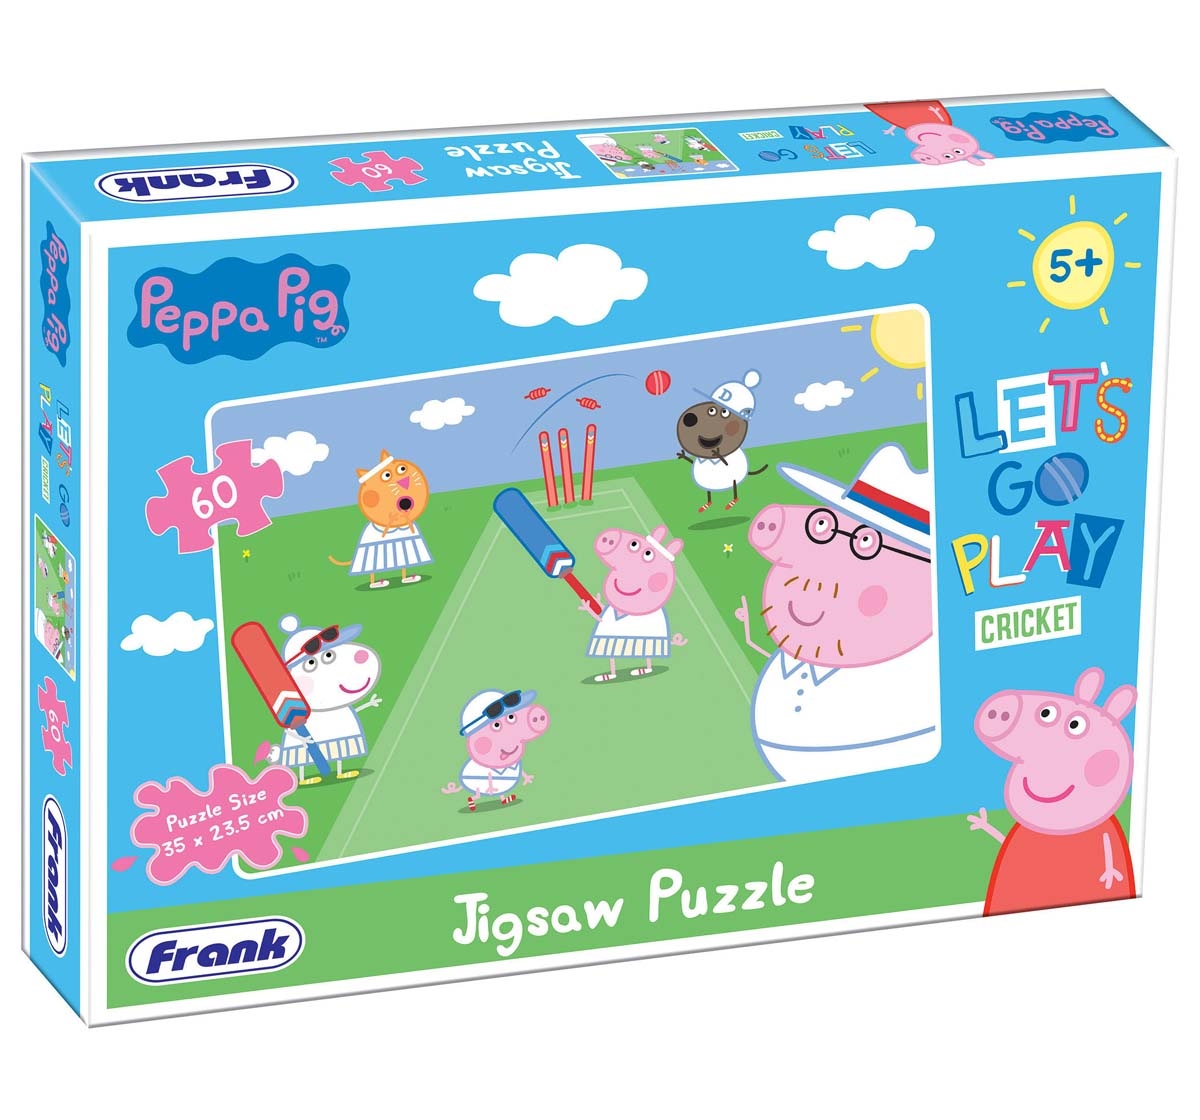 Frank | Frank Peppa Pig Play Cricket Puzzles for Kids Age 5Y+